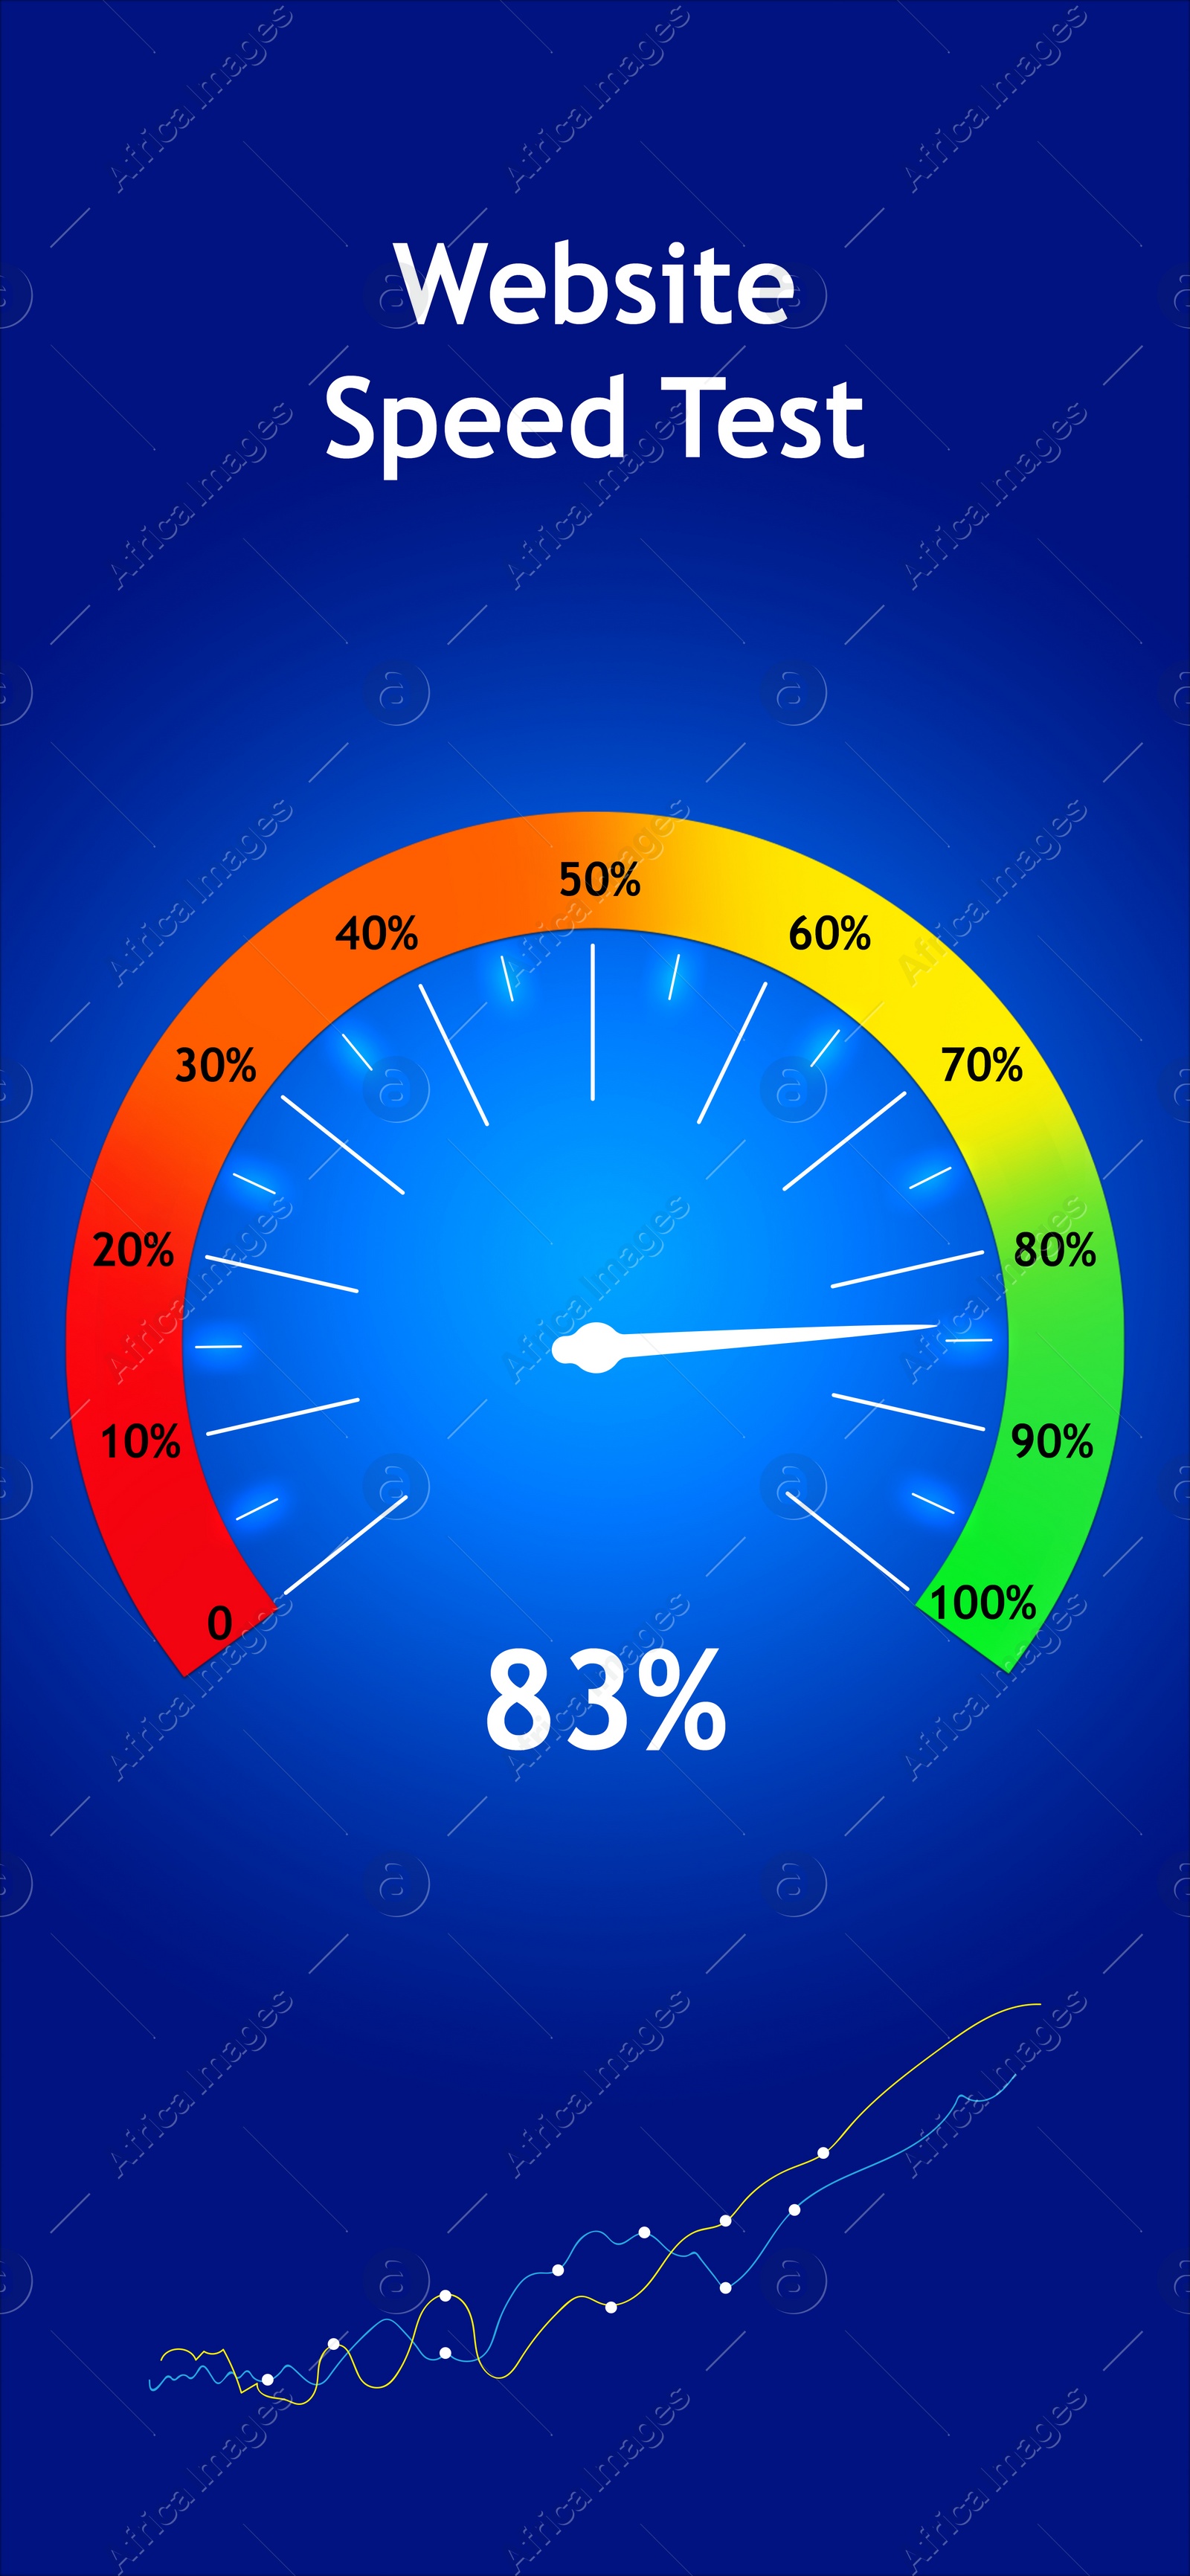 Image of Speed test screen with illustration of speedometer